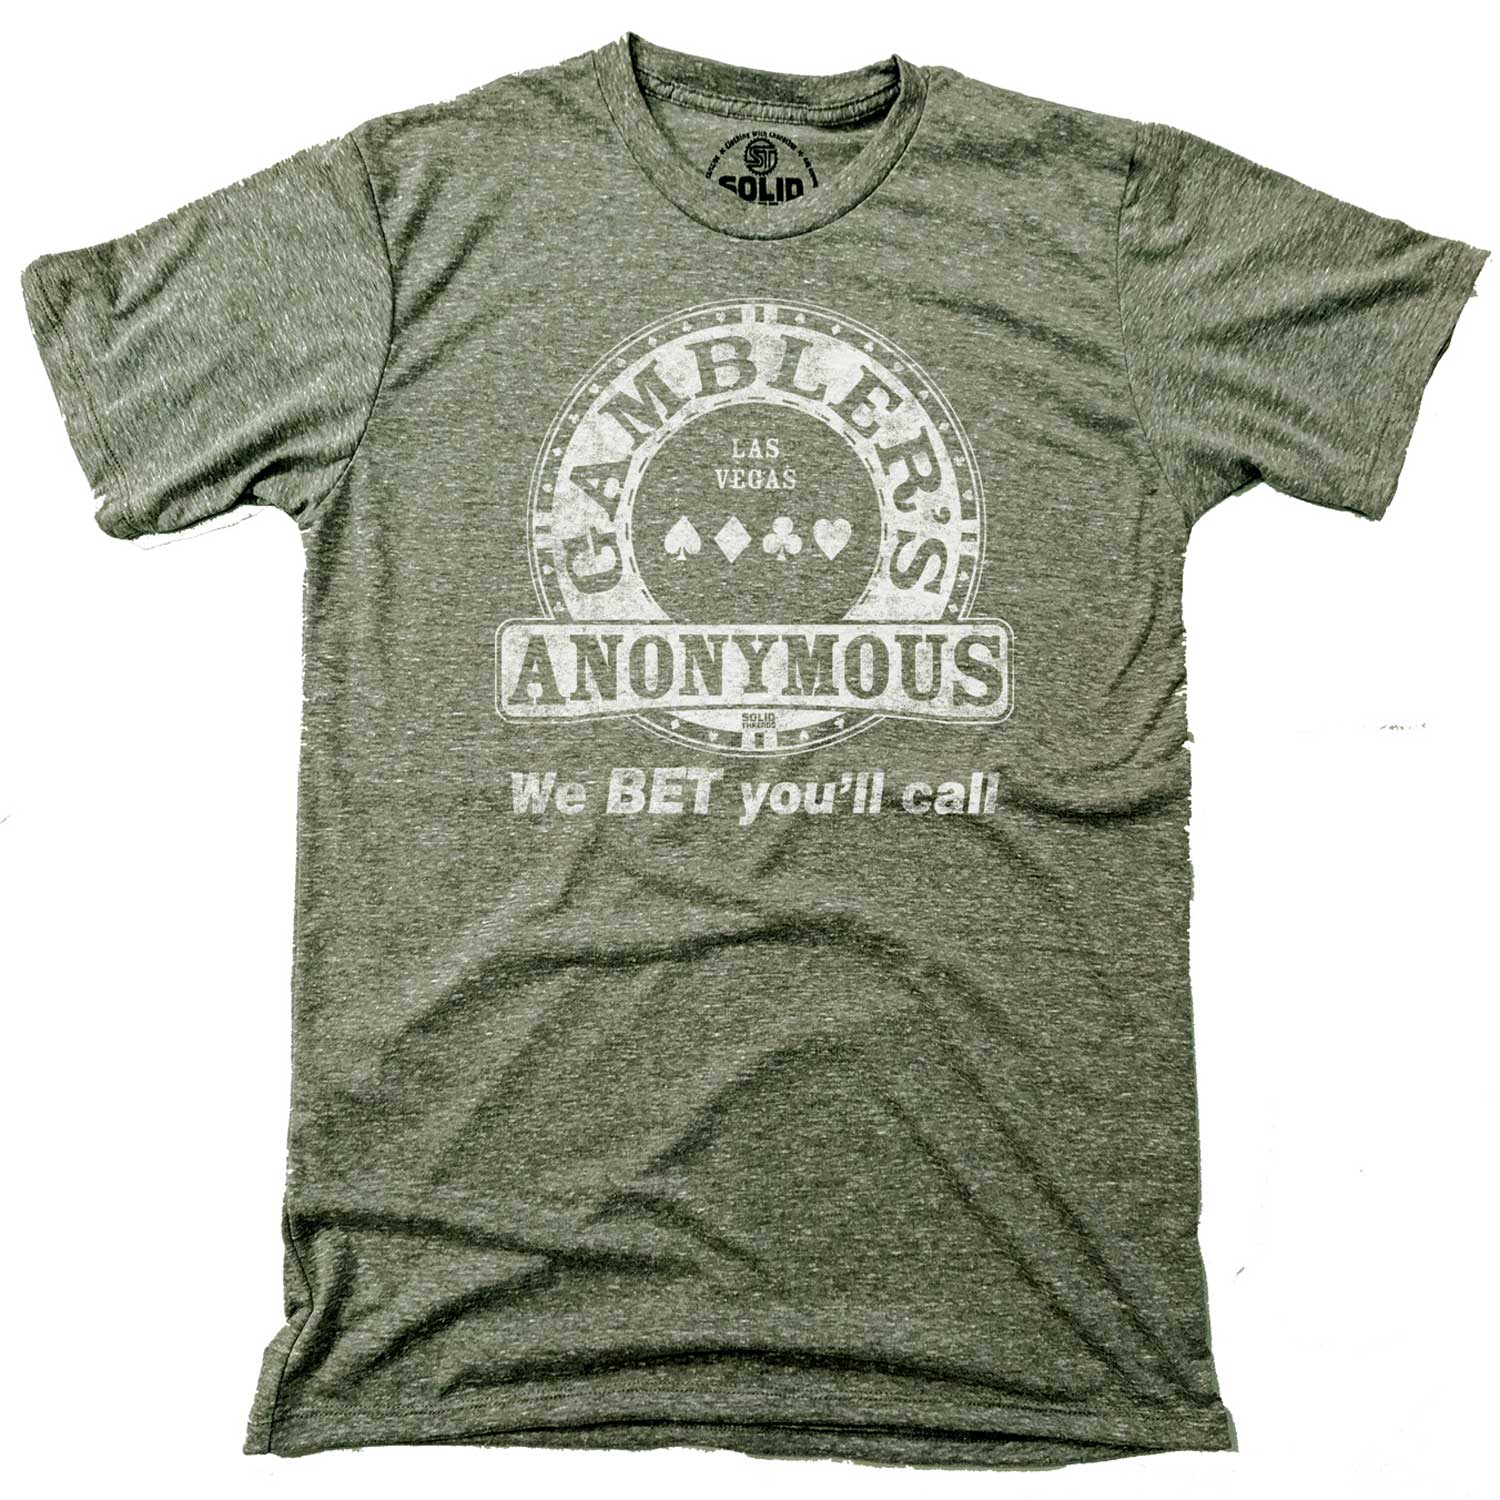 Gambler's Anonymous Vintage Inspired T-shirt | SOLID THREADS